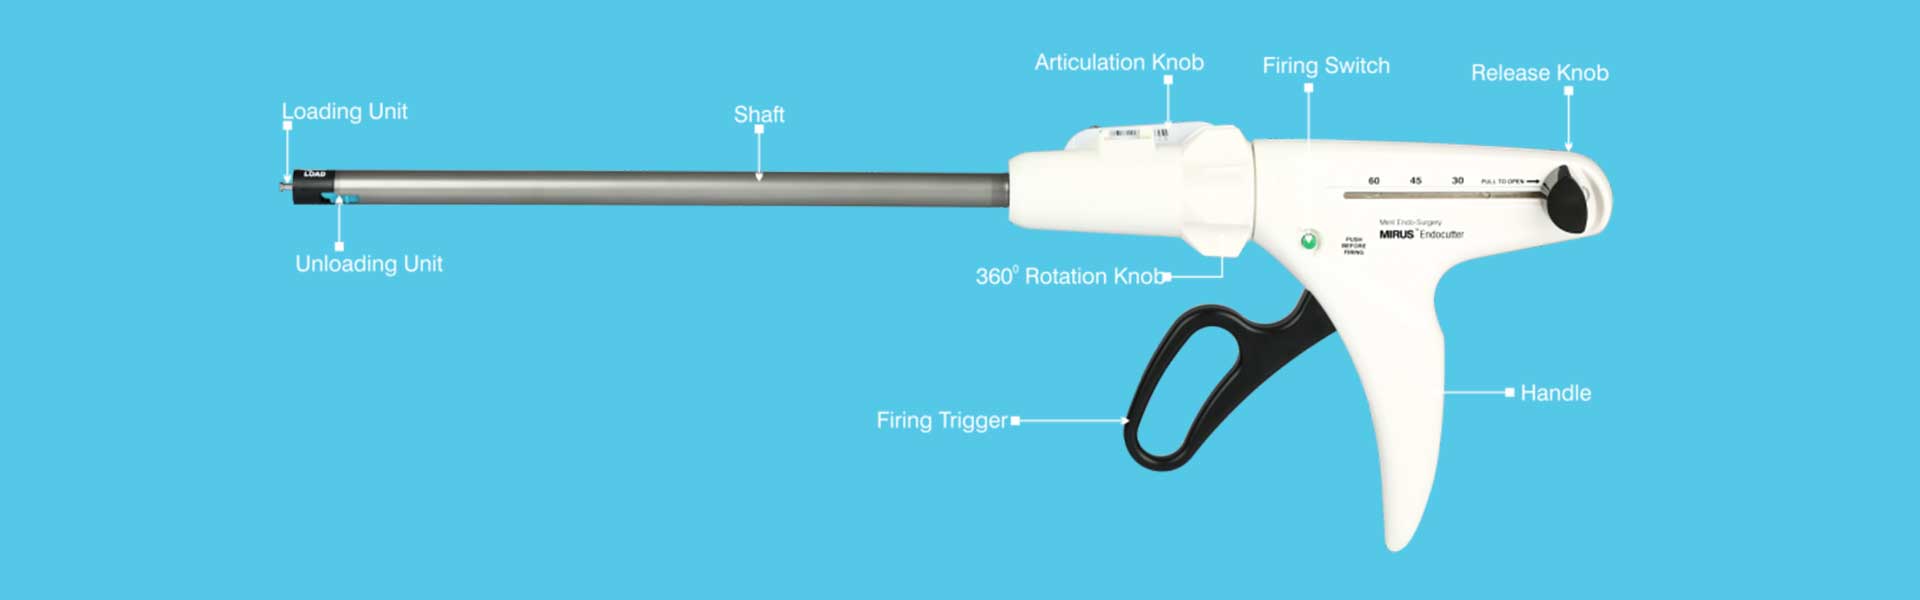 Mirus Endoscopic Linear Cutter in lengths 45 mm & 60 mm